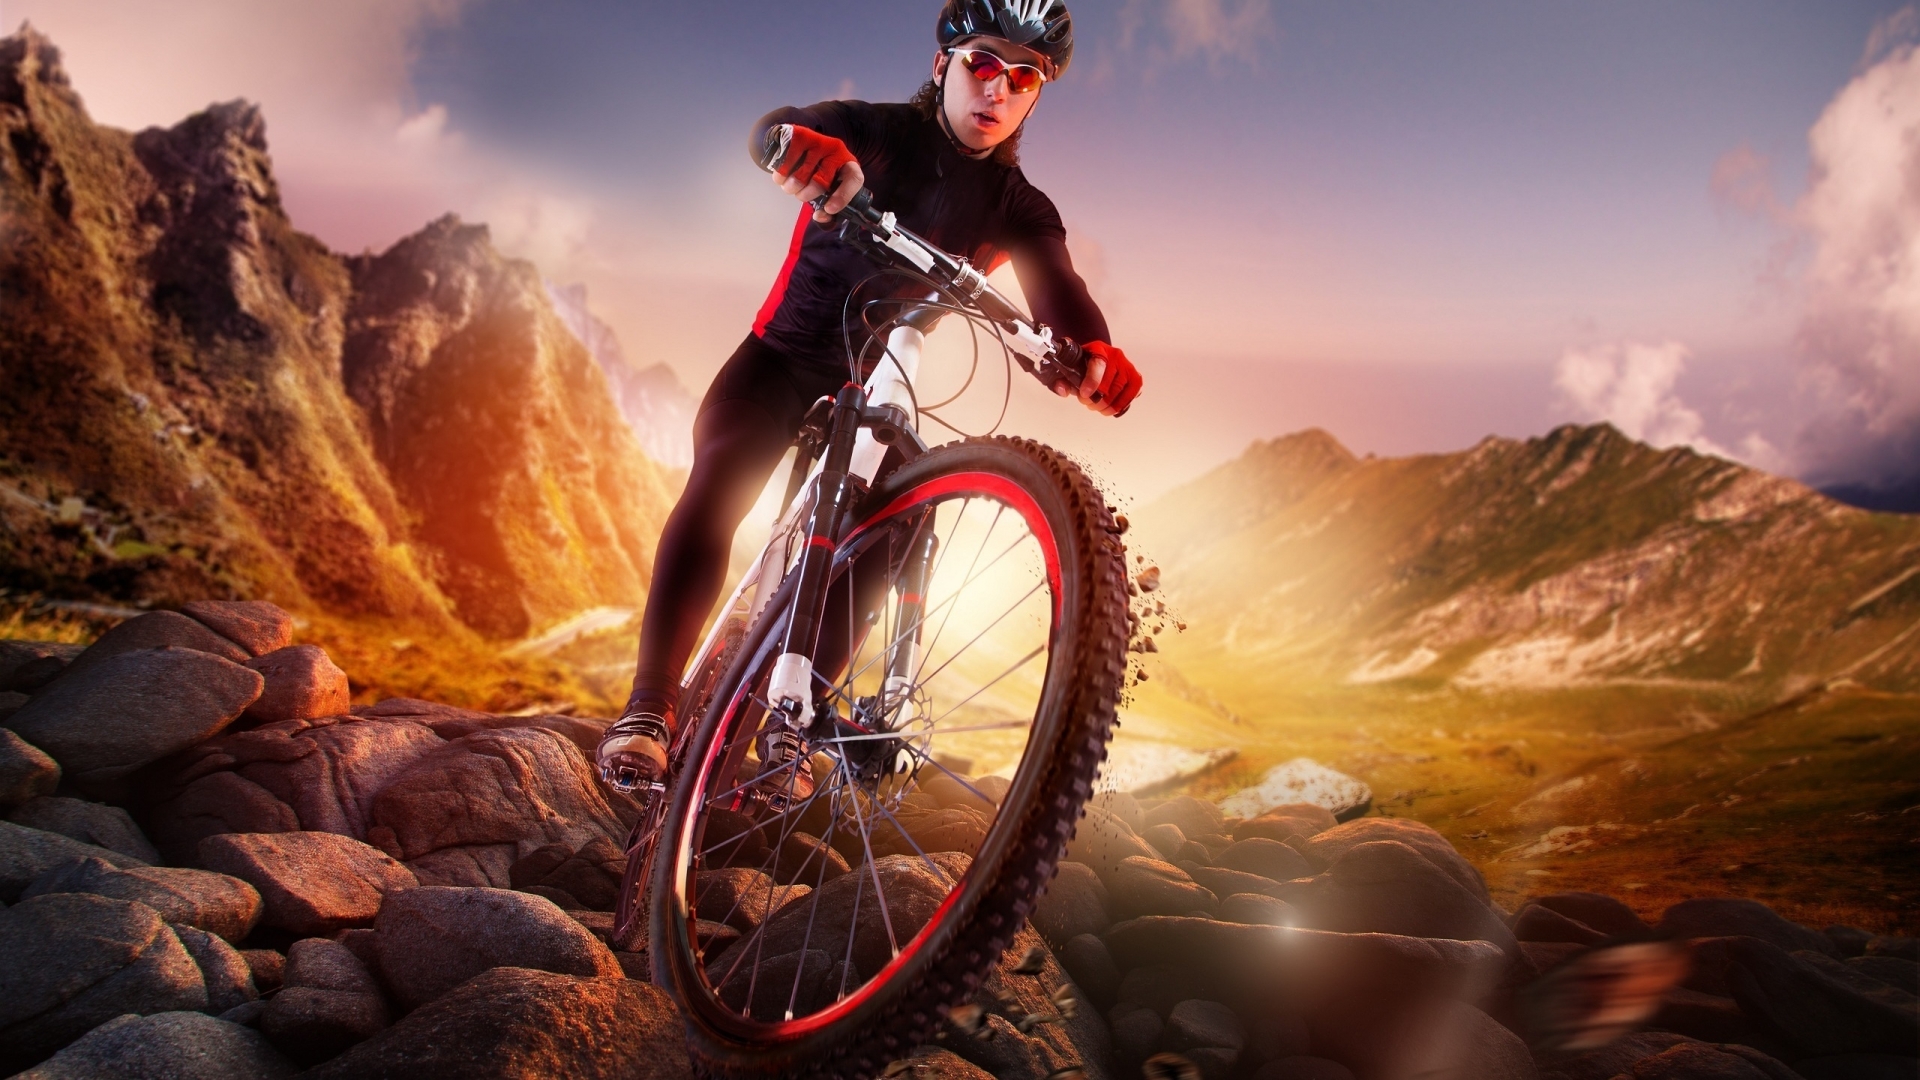 Abstract Mountain Biker for 1920 x 1080 HDTV 1080p resolution